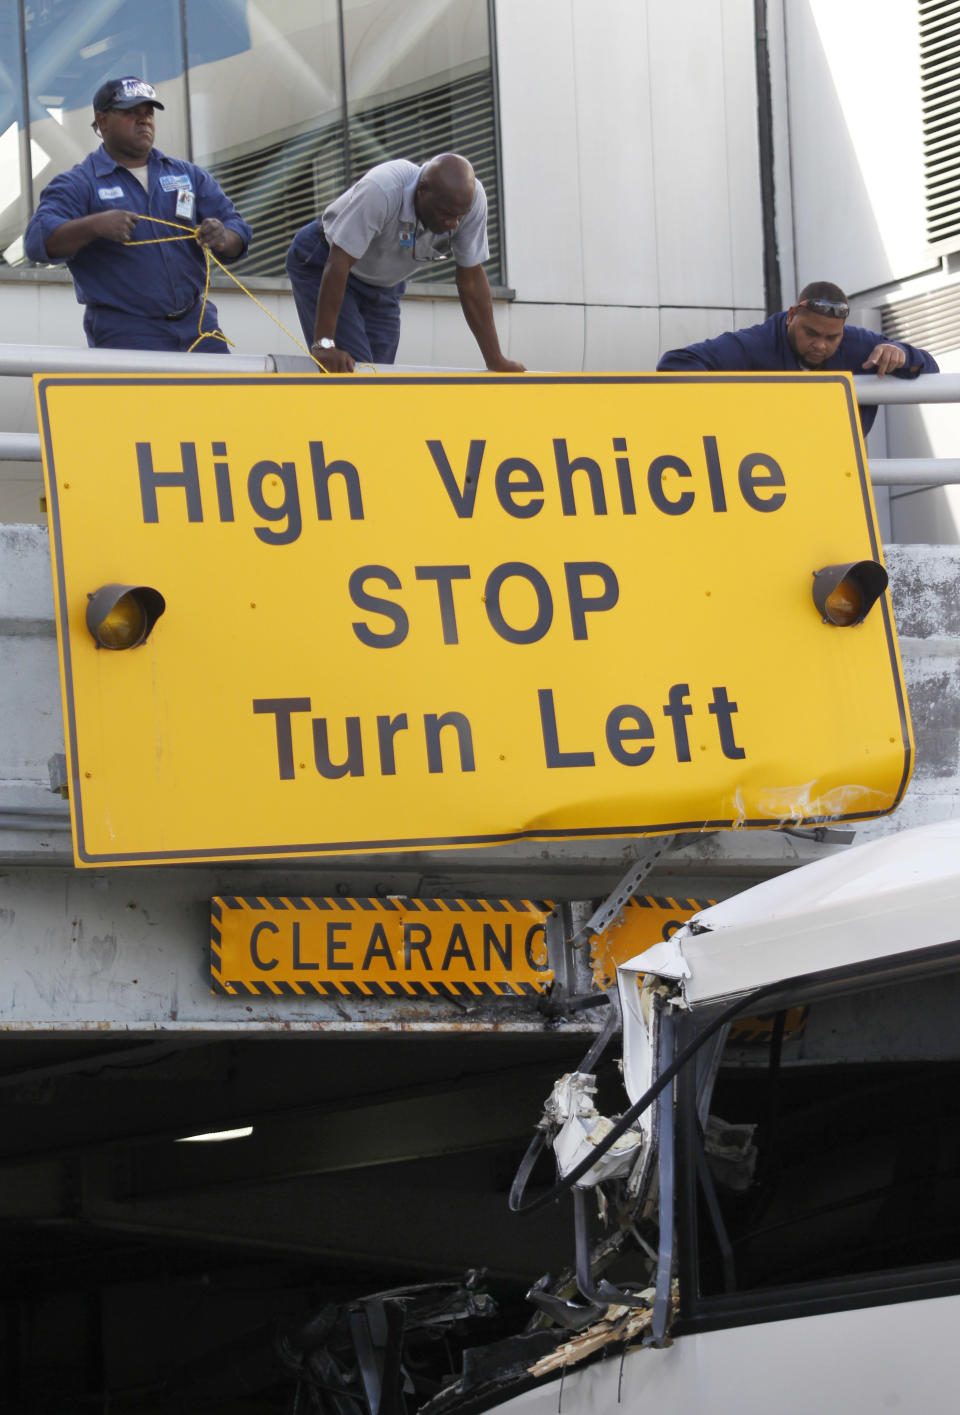 Airport workers secure a sign after a bus hit a concrete overpass at Miami International Airport in Miami on Saturday, Dec. 1, 2012. The vehicle was too tall for the 8-foot-6-inch entrance to the arrivals area, and buses are supposed to go through the departures area which has a higher ceiling, according to an airport spokesperson. (AP Photo/Wilfredo Lee)